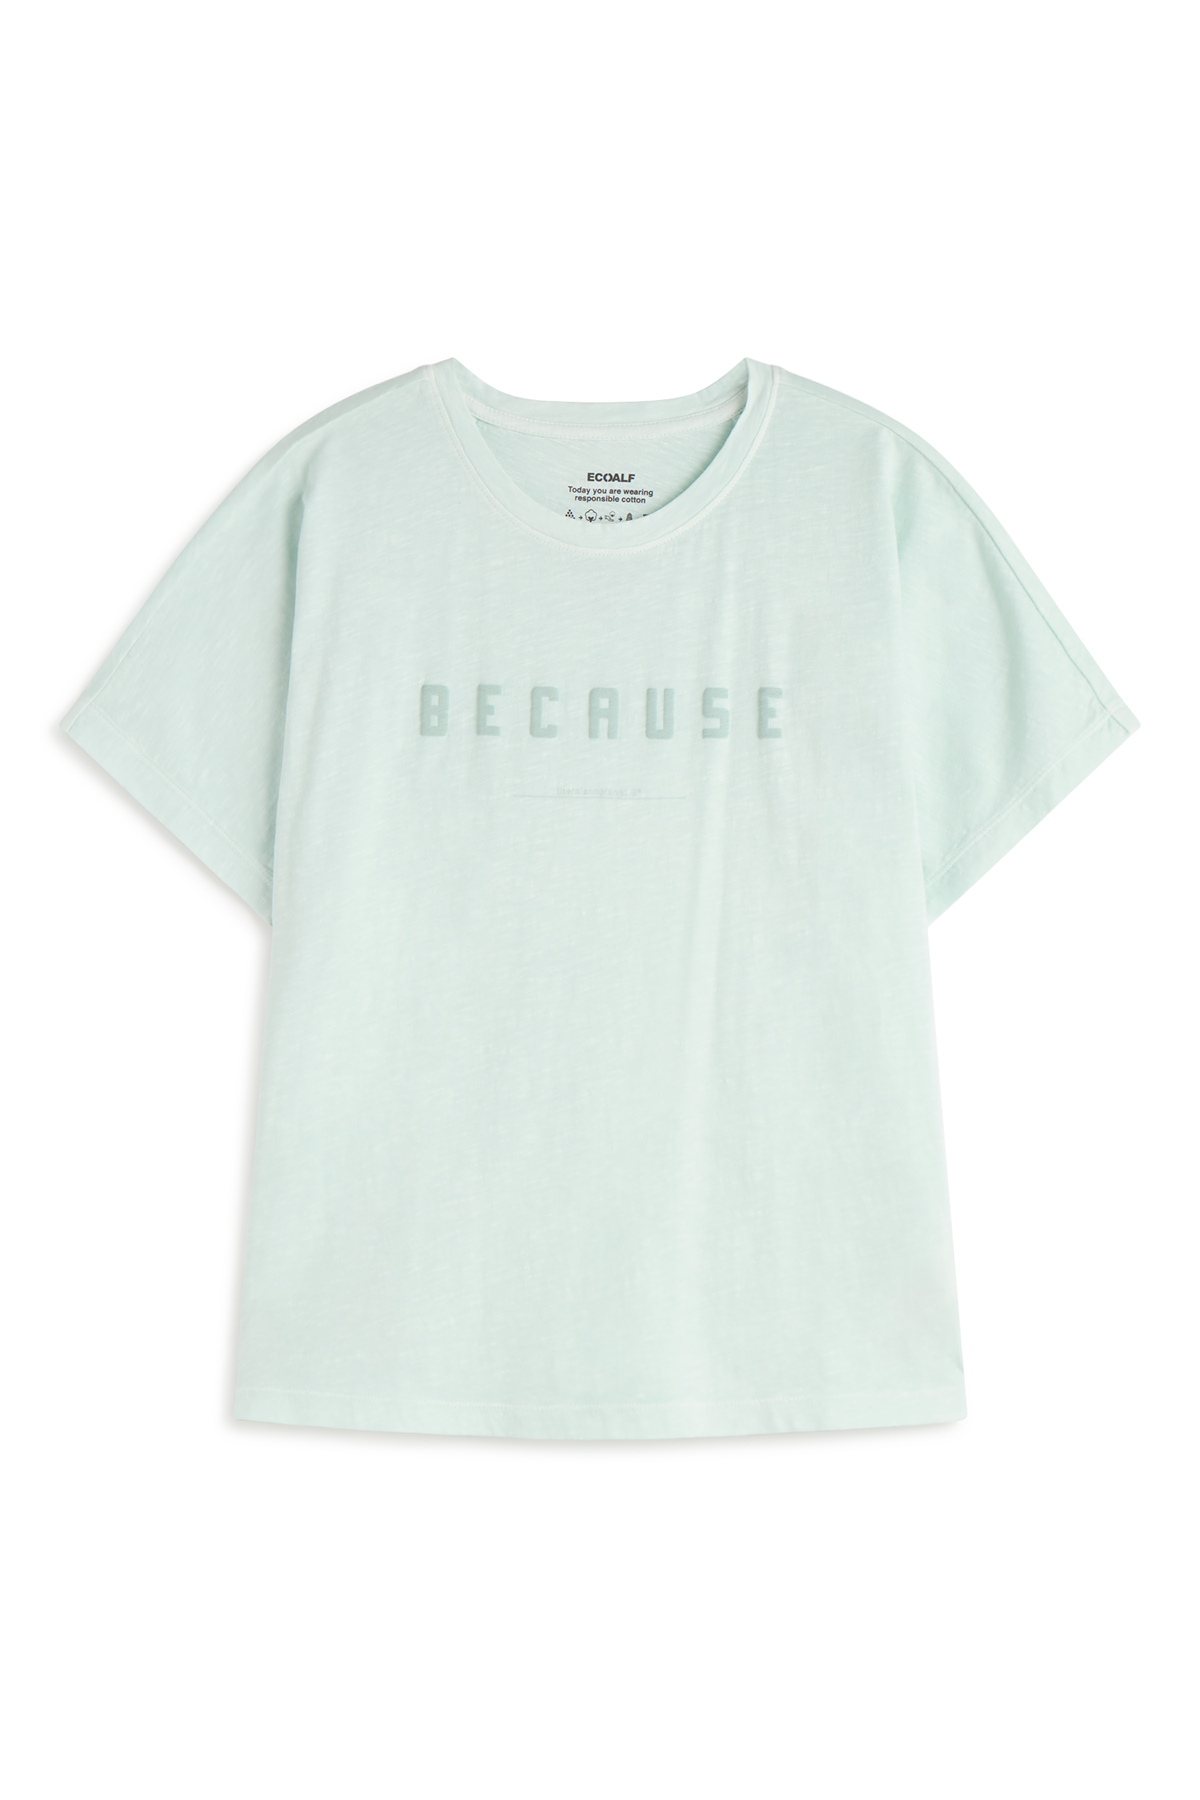 ECOALF SHIRT 'BECAUSE THERE IS NO PLANET B' PALE MINT